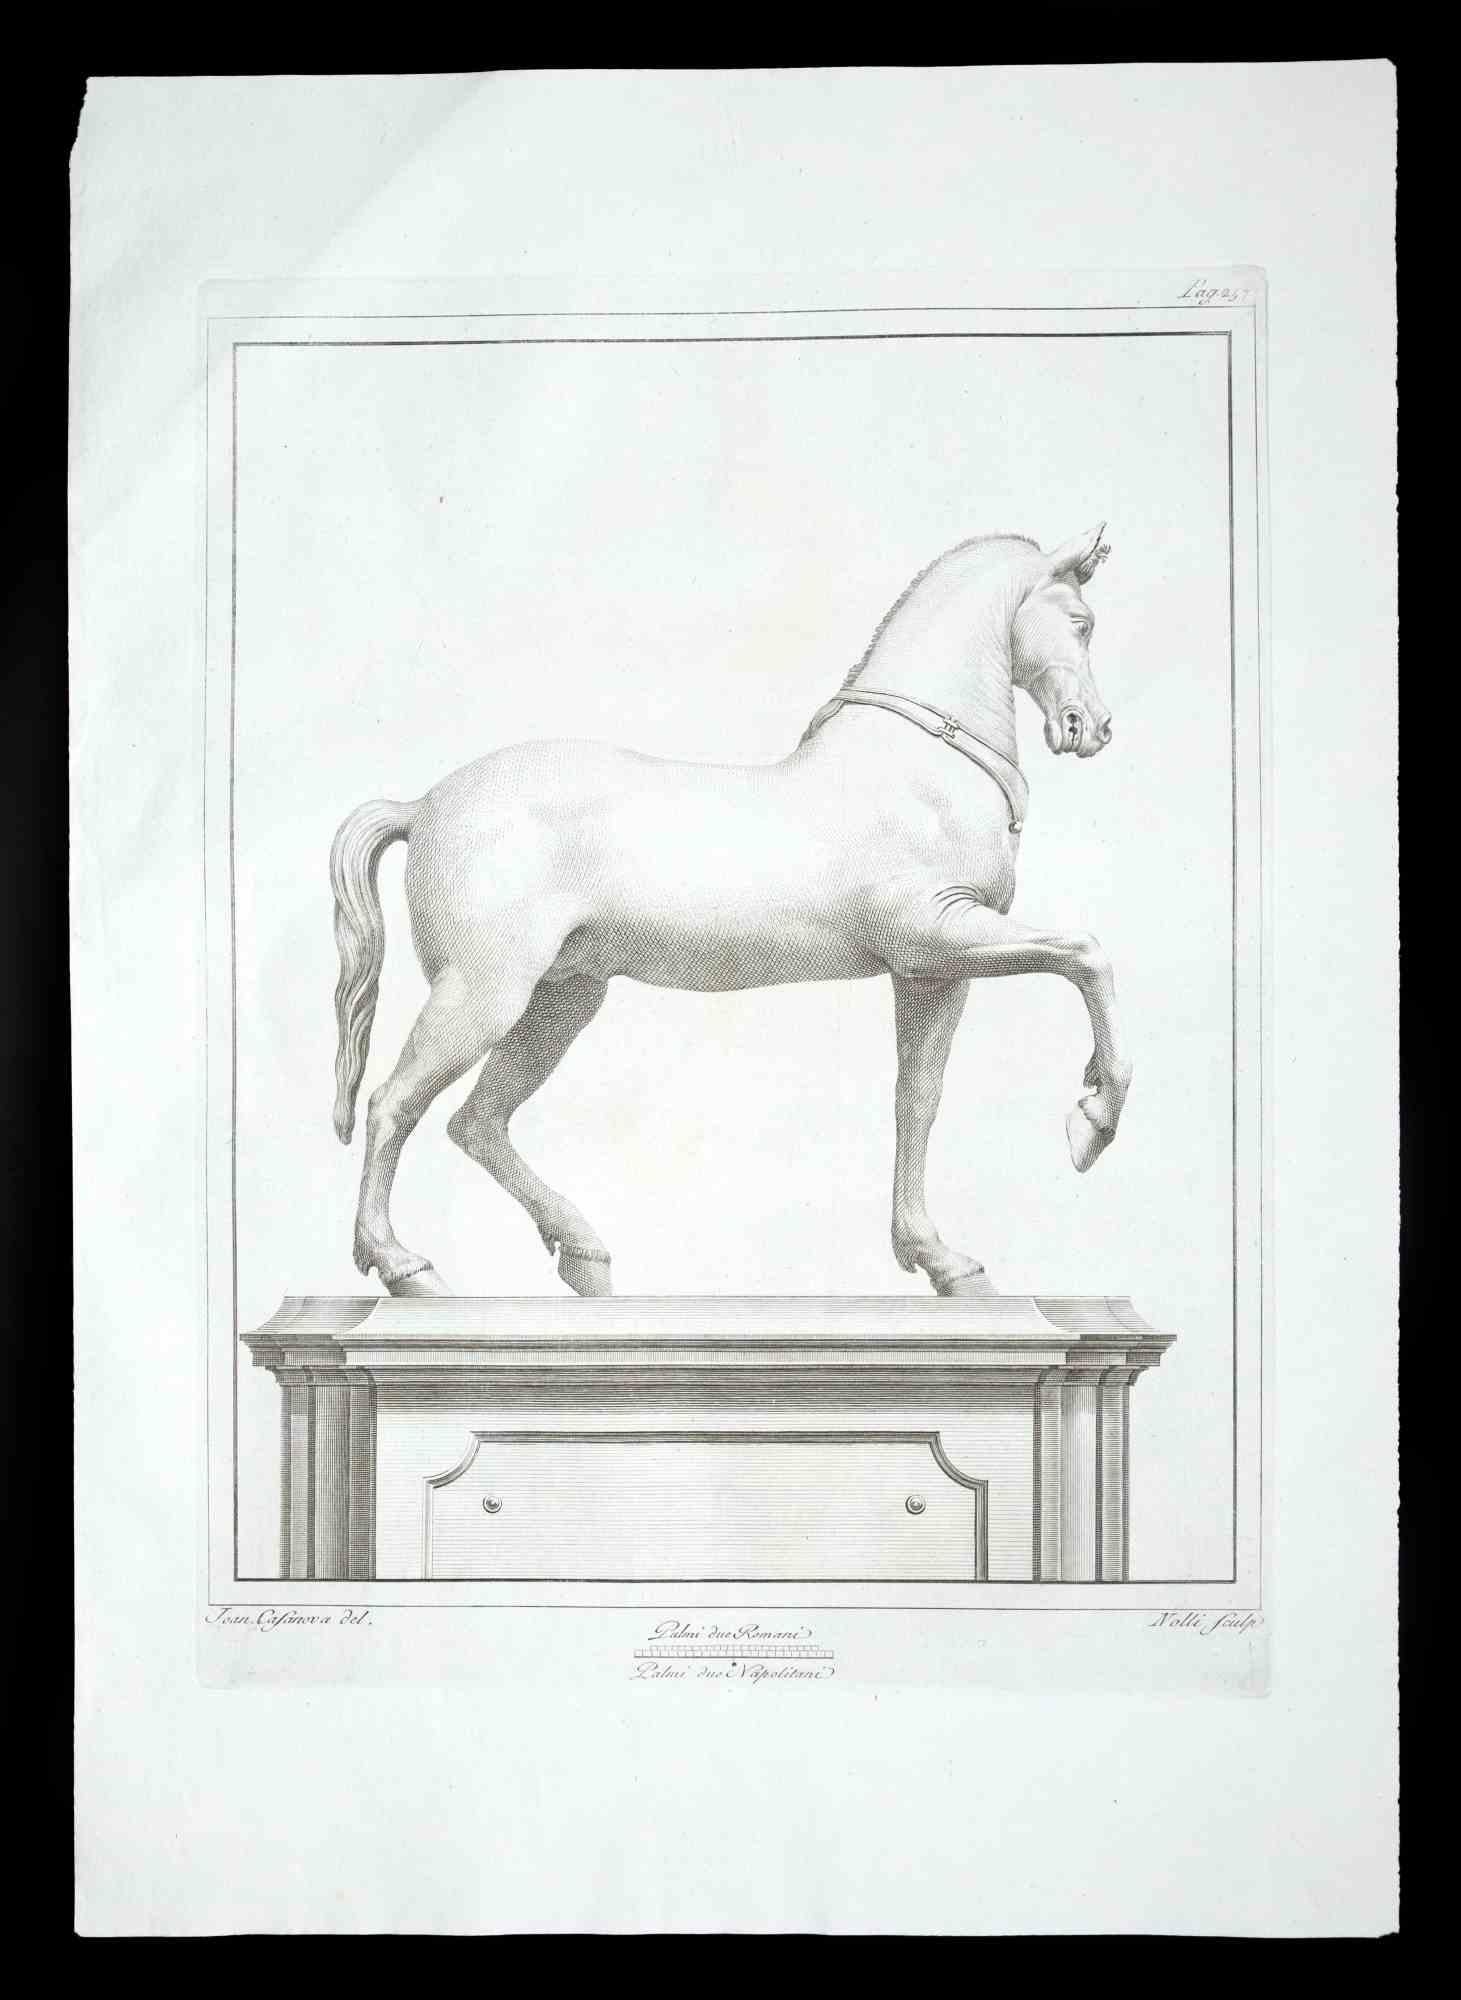 Ancient Roman Statue of a Horse - Original Etching by Carlo Nolli - 1700s